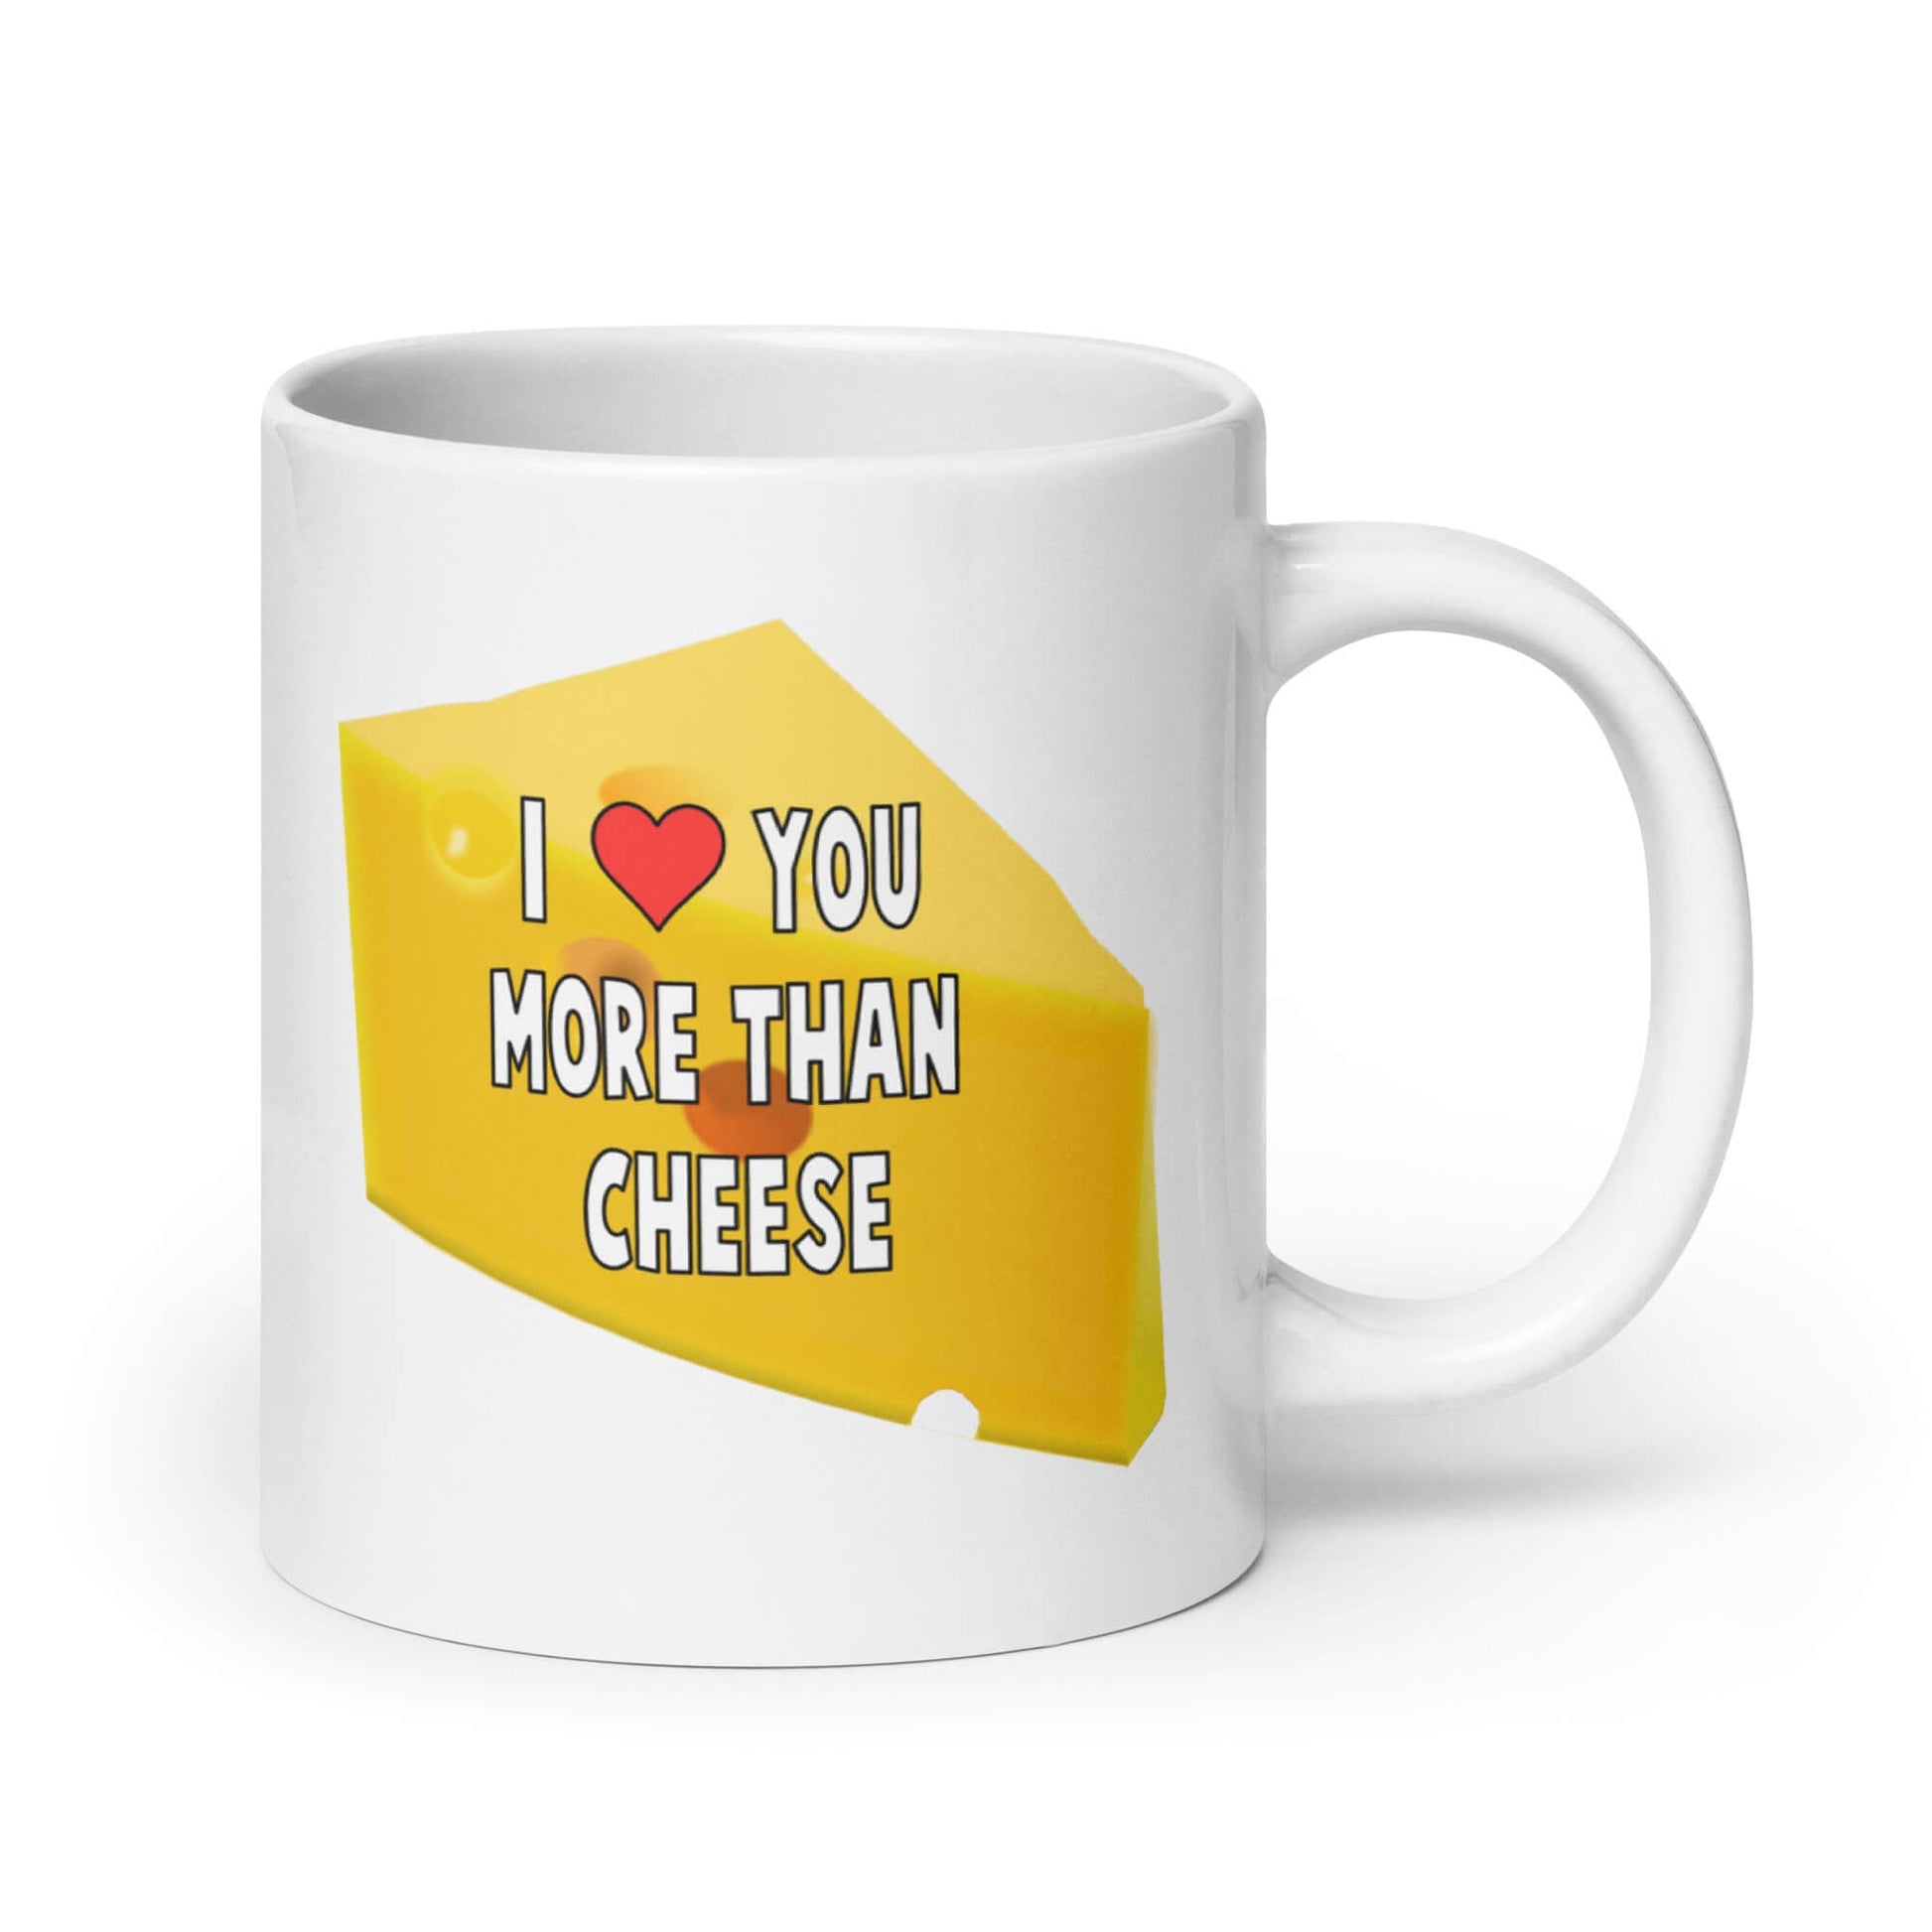 White ceramic coffee mug with an image of a wedge of cheese and the phrase I heart you more than cheese printed on both sides.